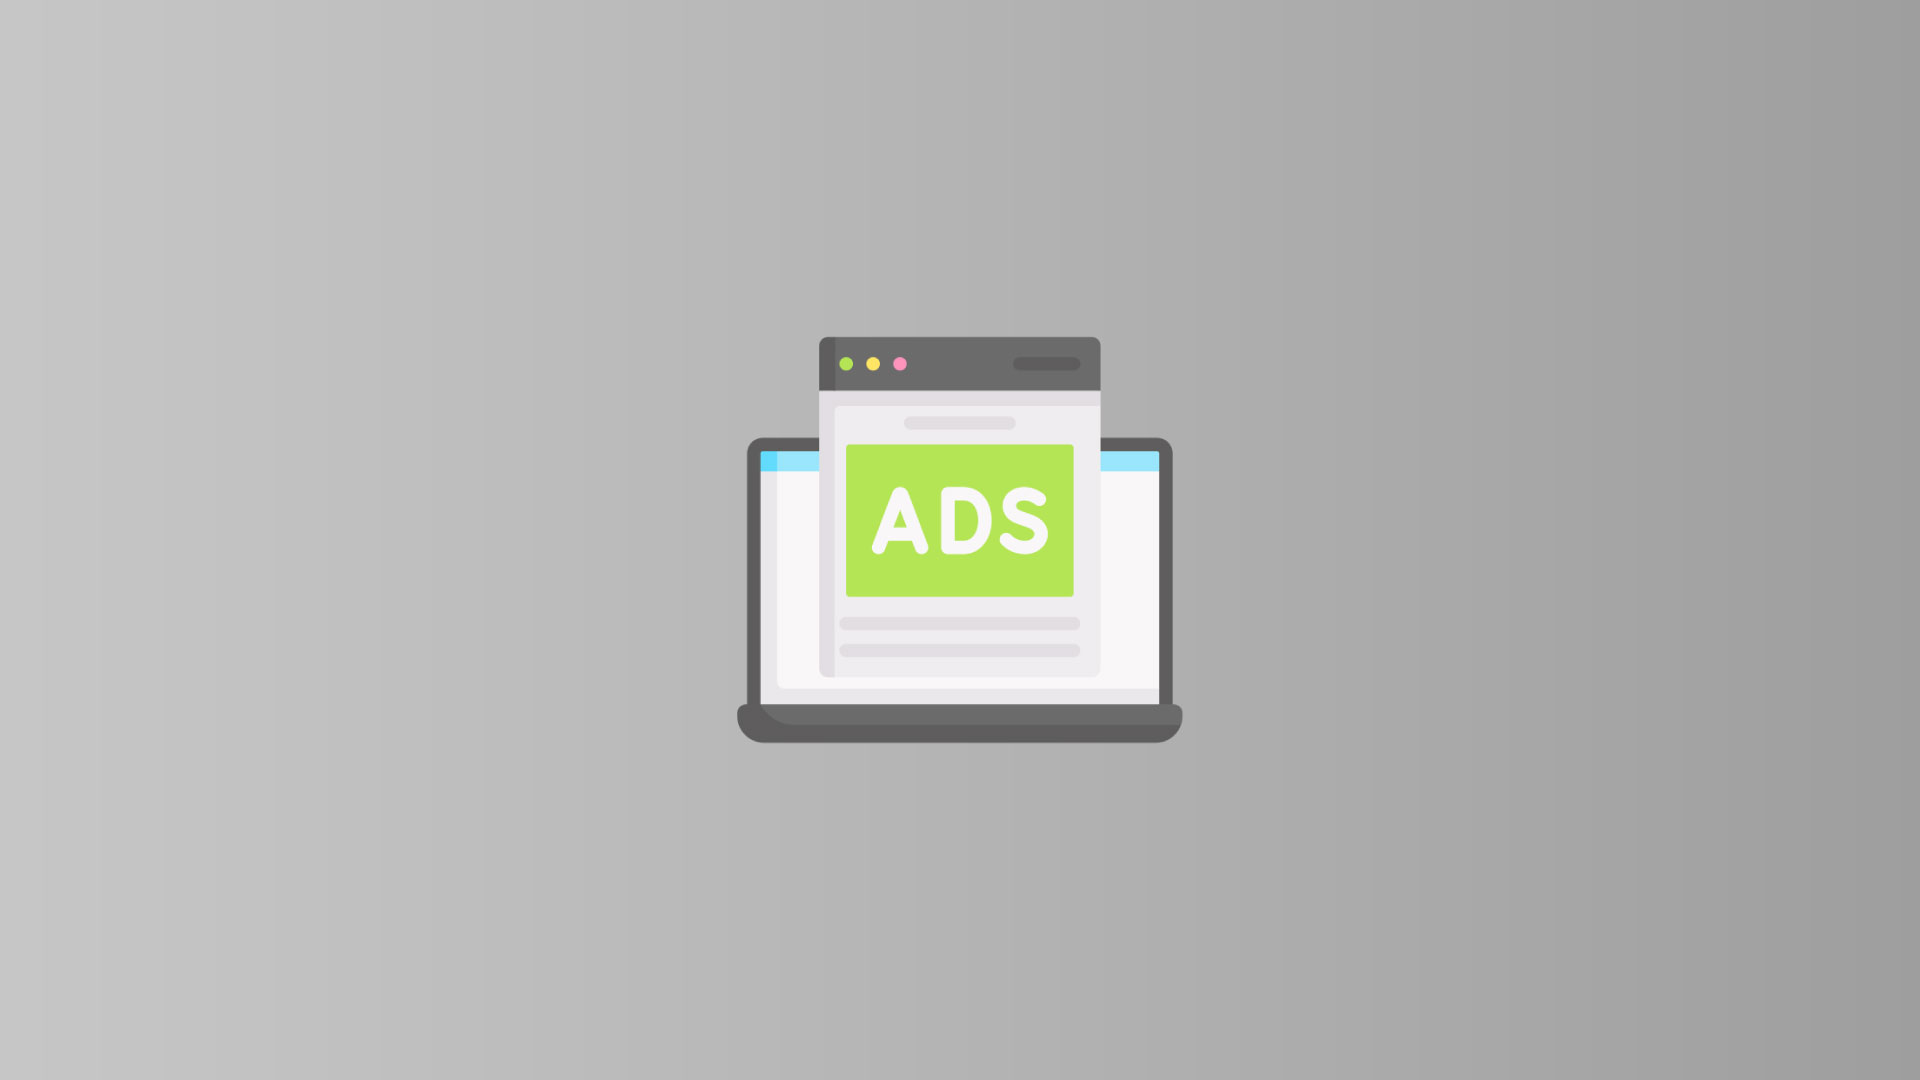 Web Interstitial Ads for Desktop and Mobile Web recently launched by google